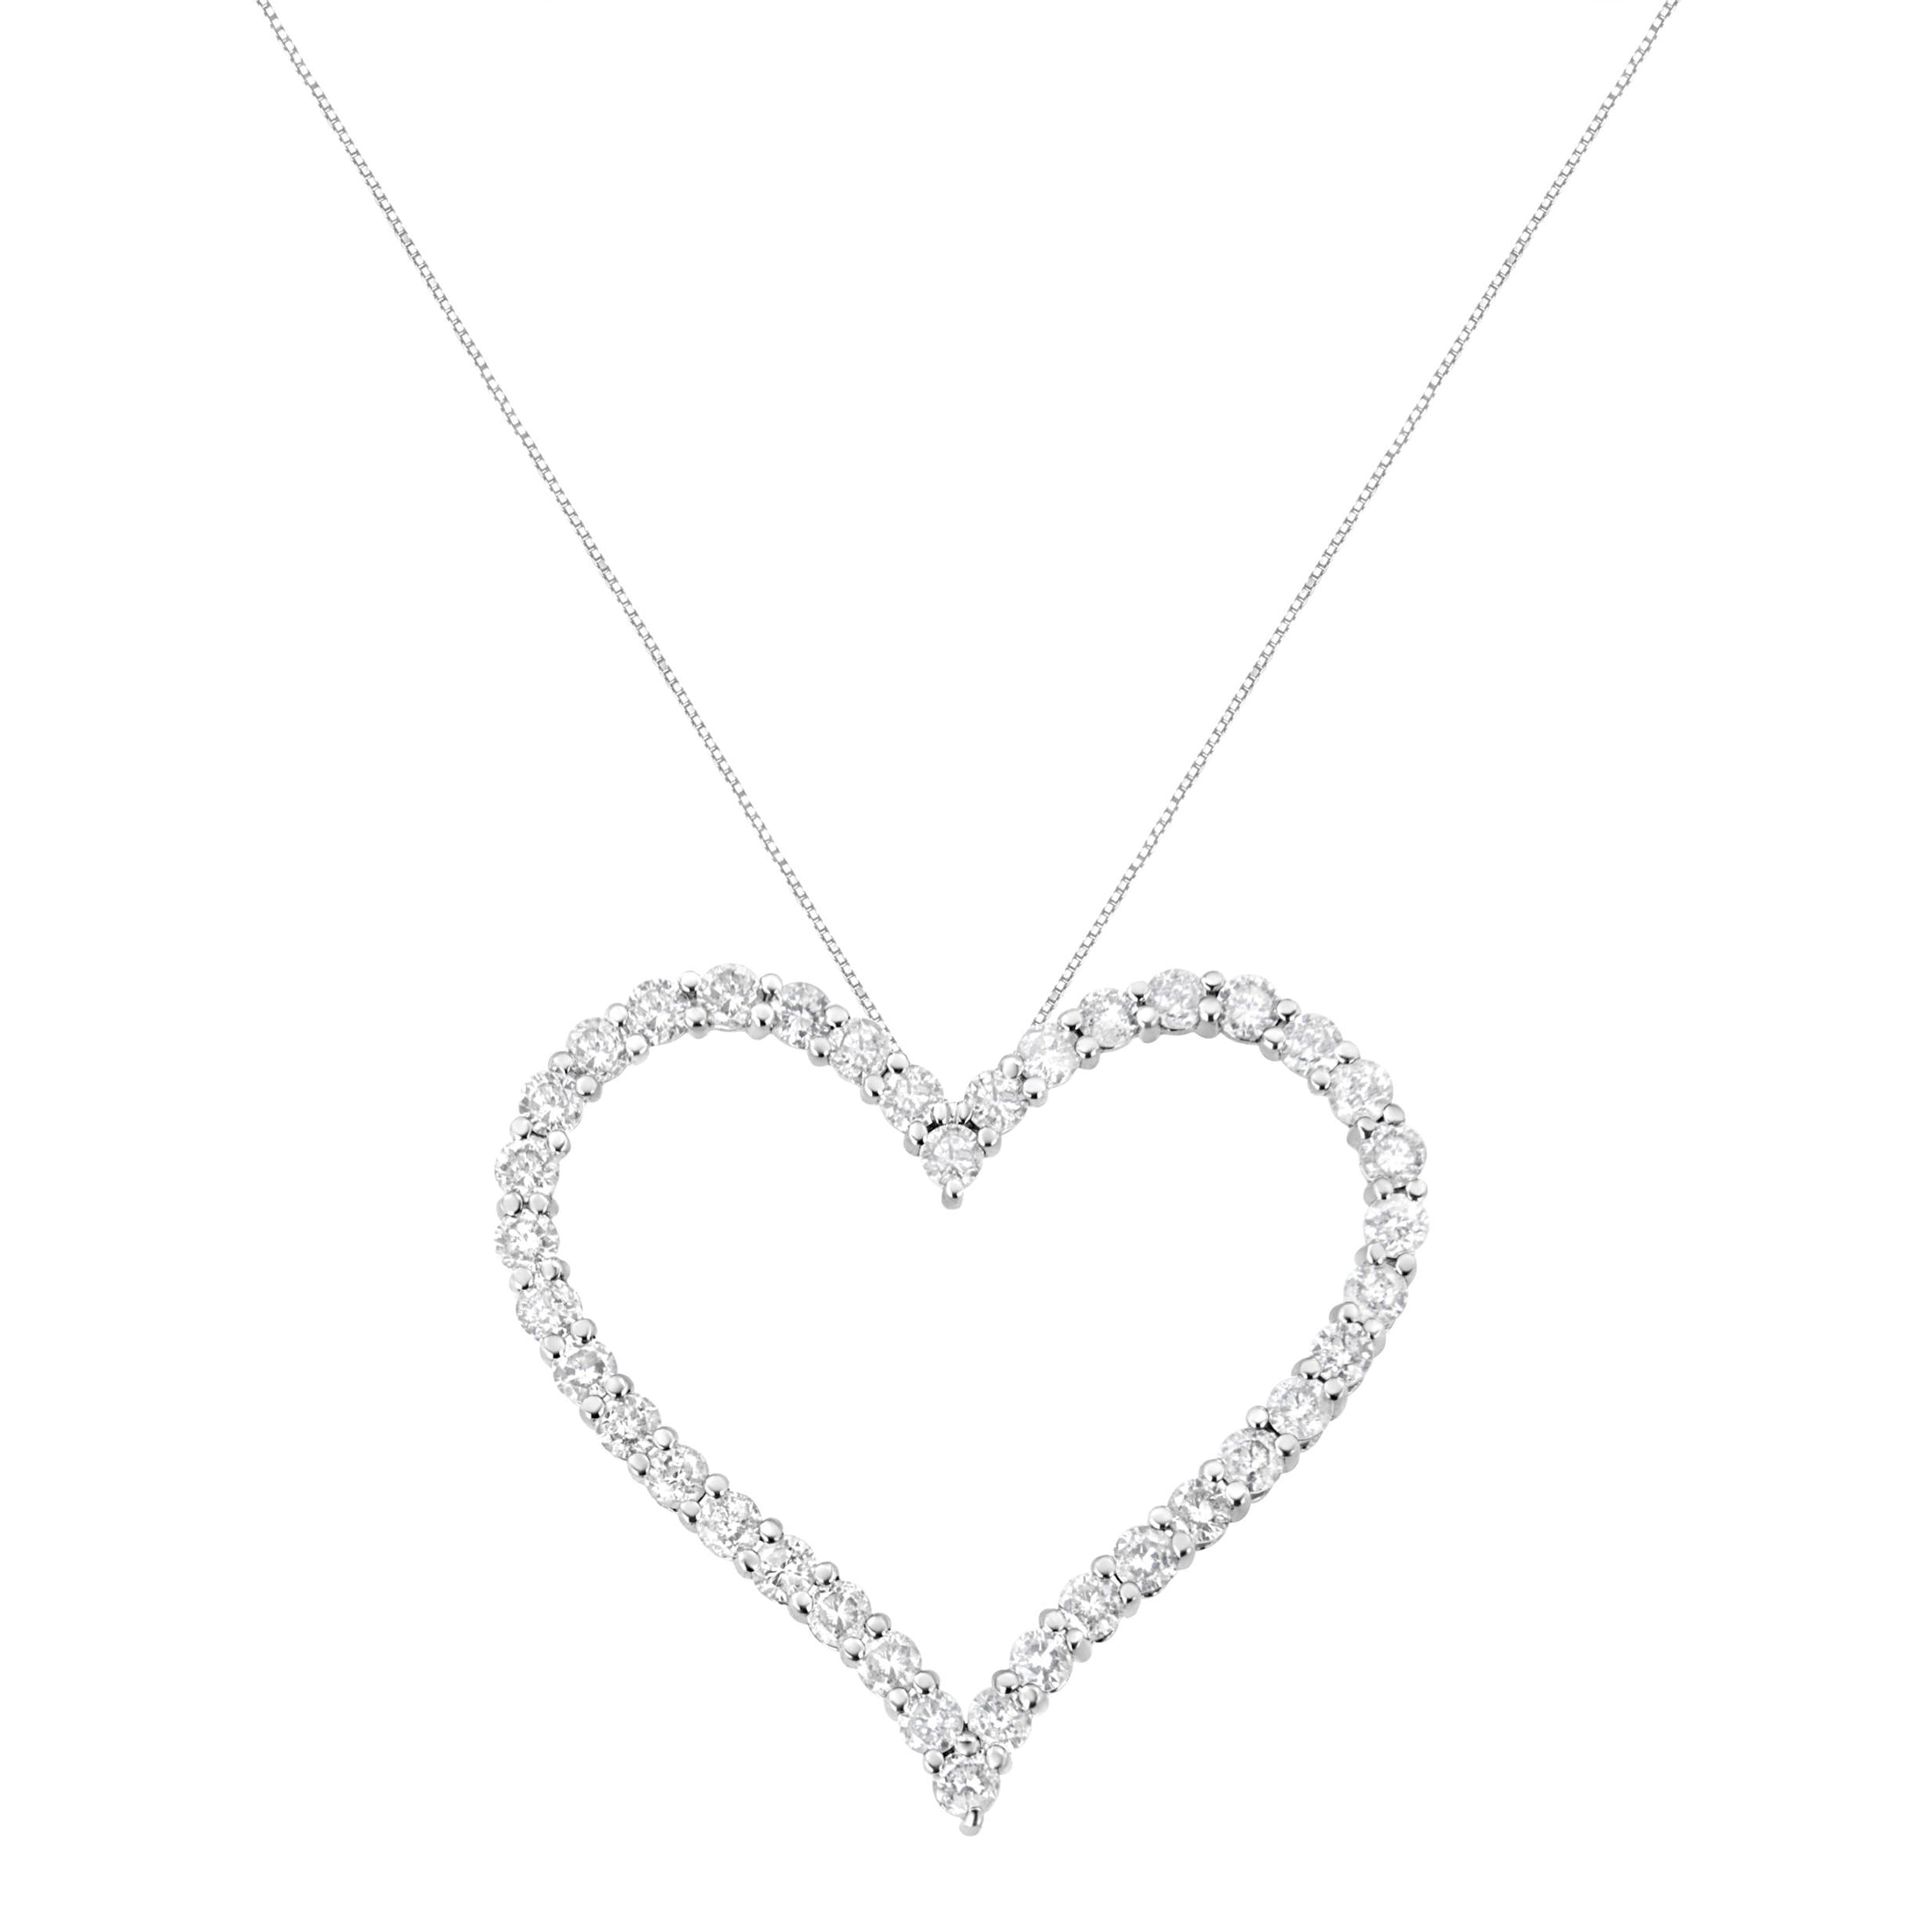 .925 Sterling Silver 3.0 cttw Round-Cut Diamond Open Heart Pendant Necklace - 18"